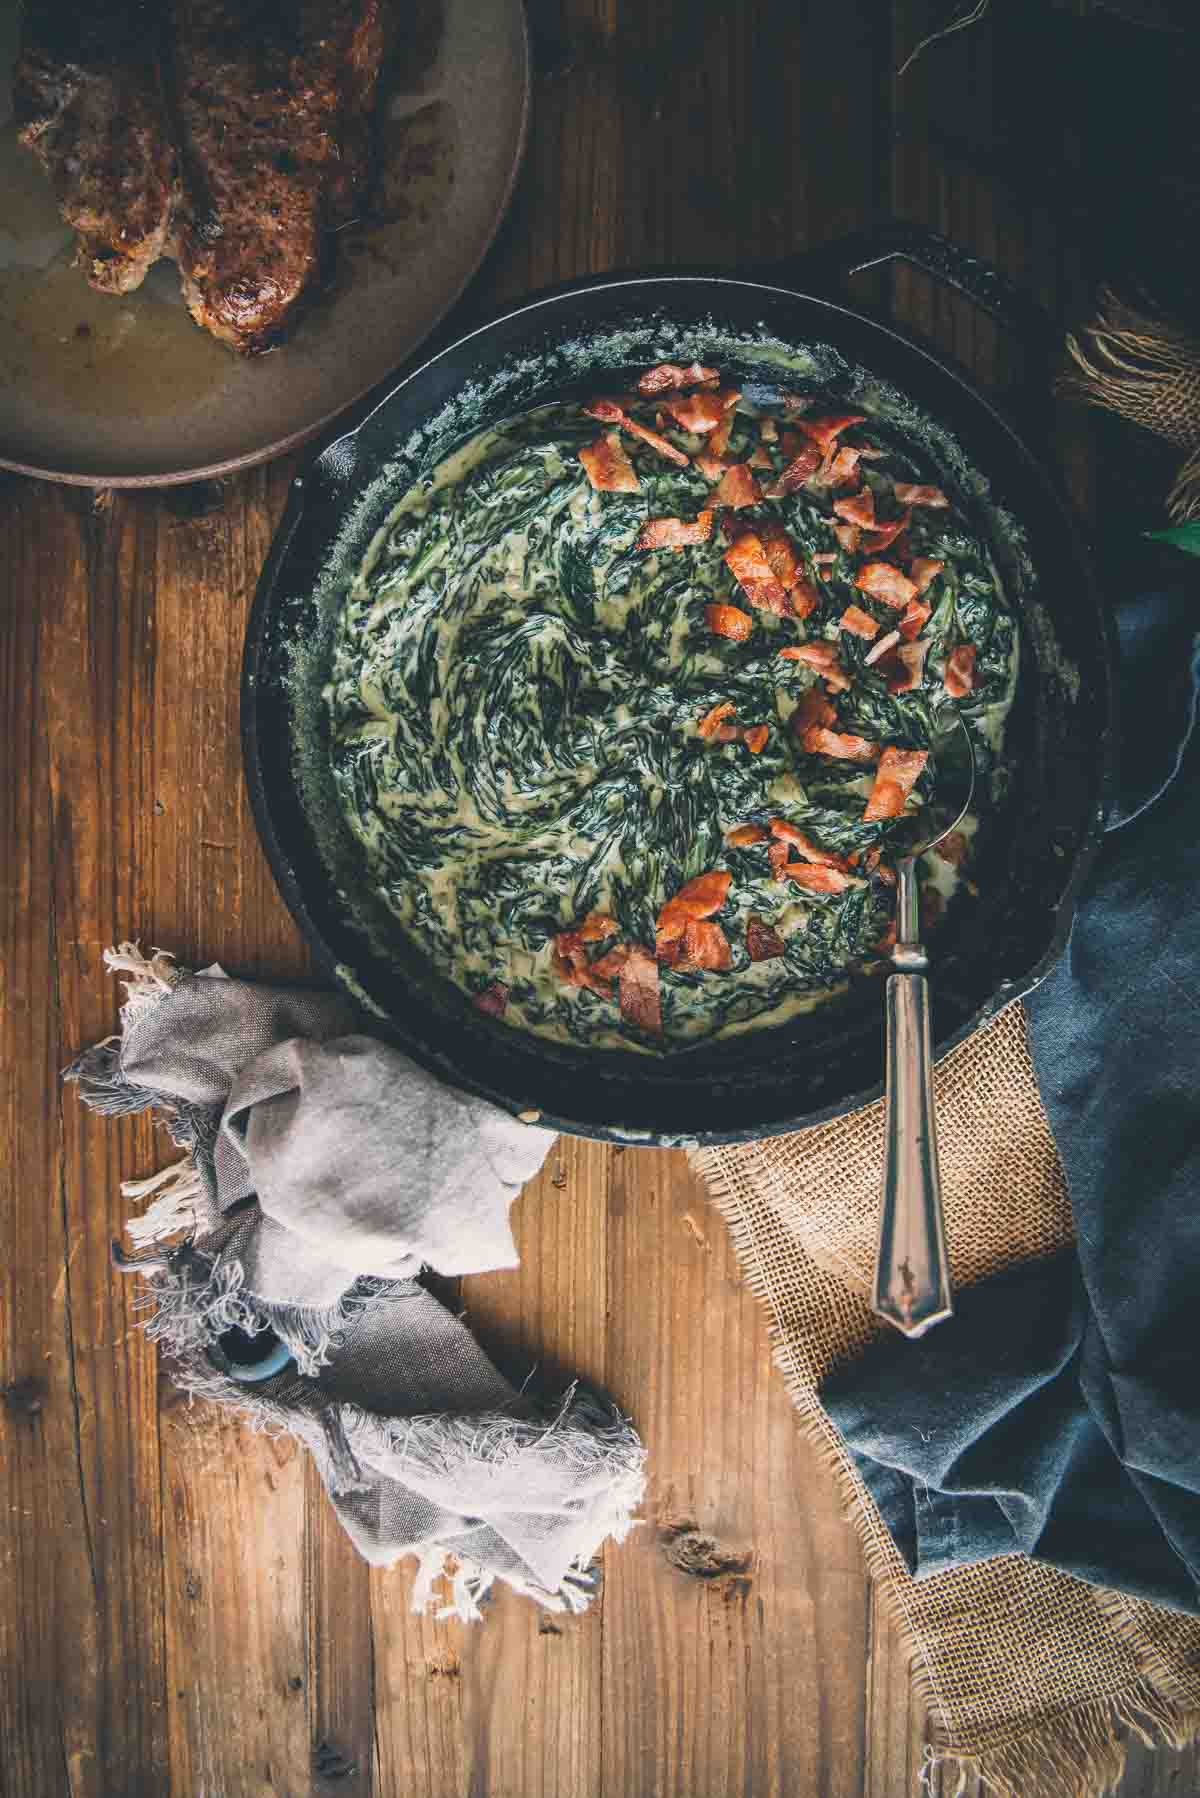 Overhead shot of creamed spinach in a cast iron skillet on a wooden table.